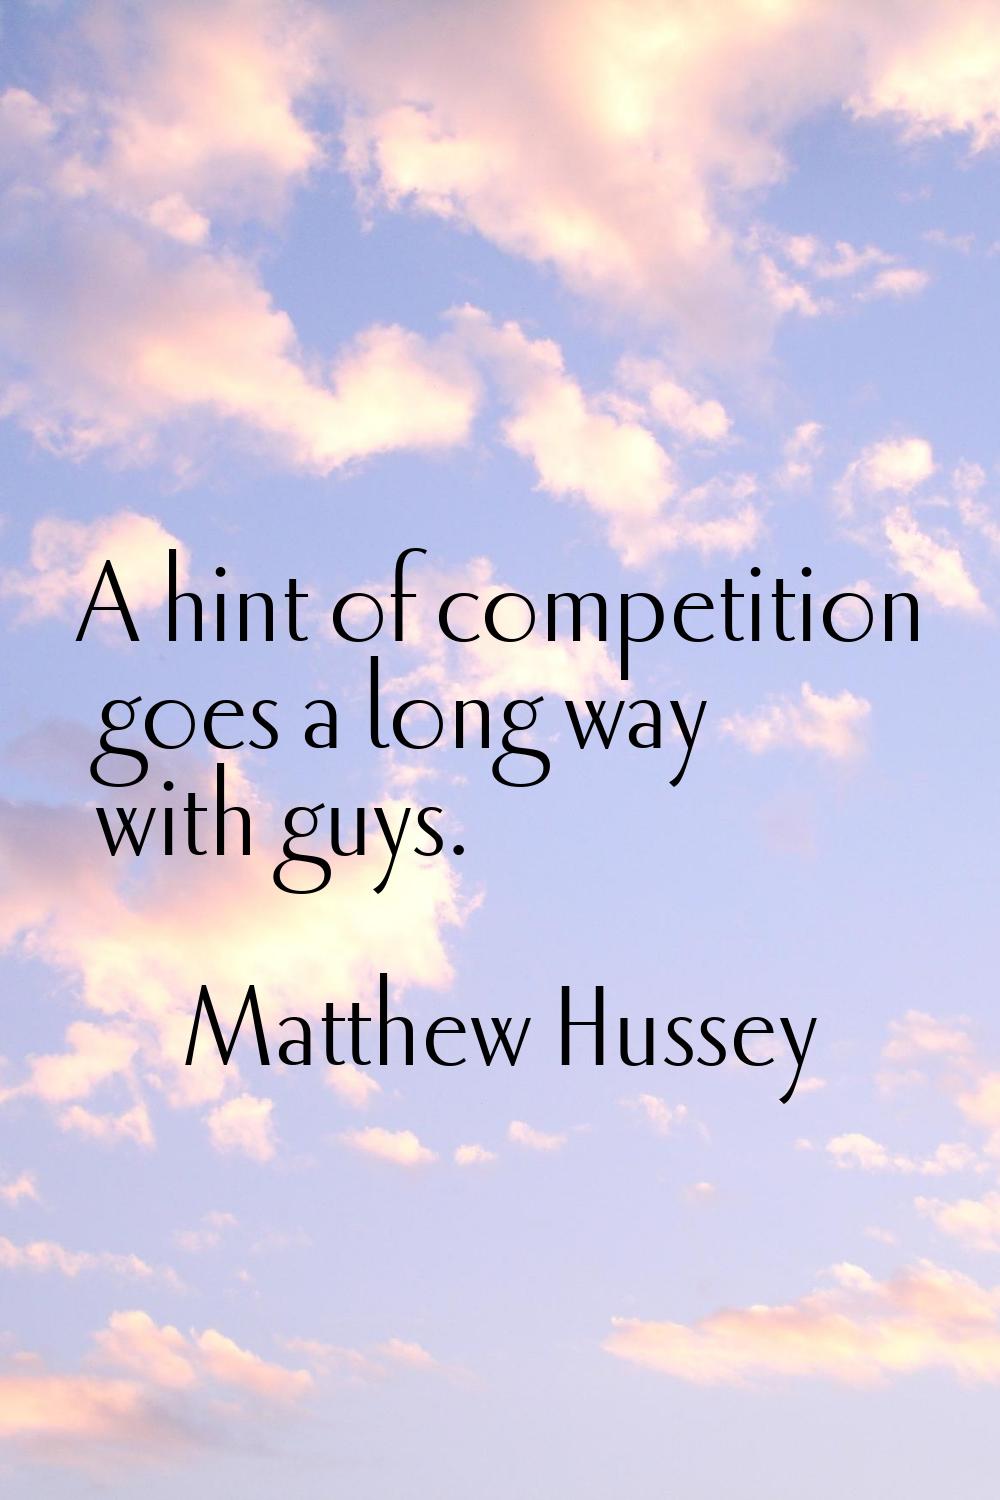 A hint of competition goes a long way with guys.